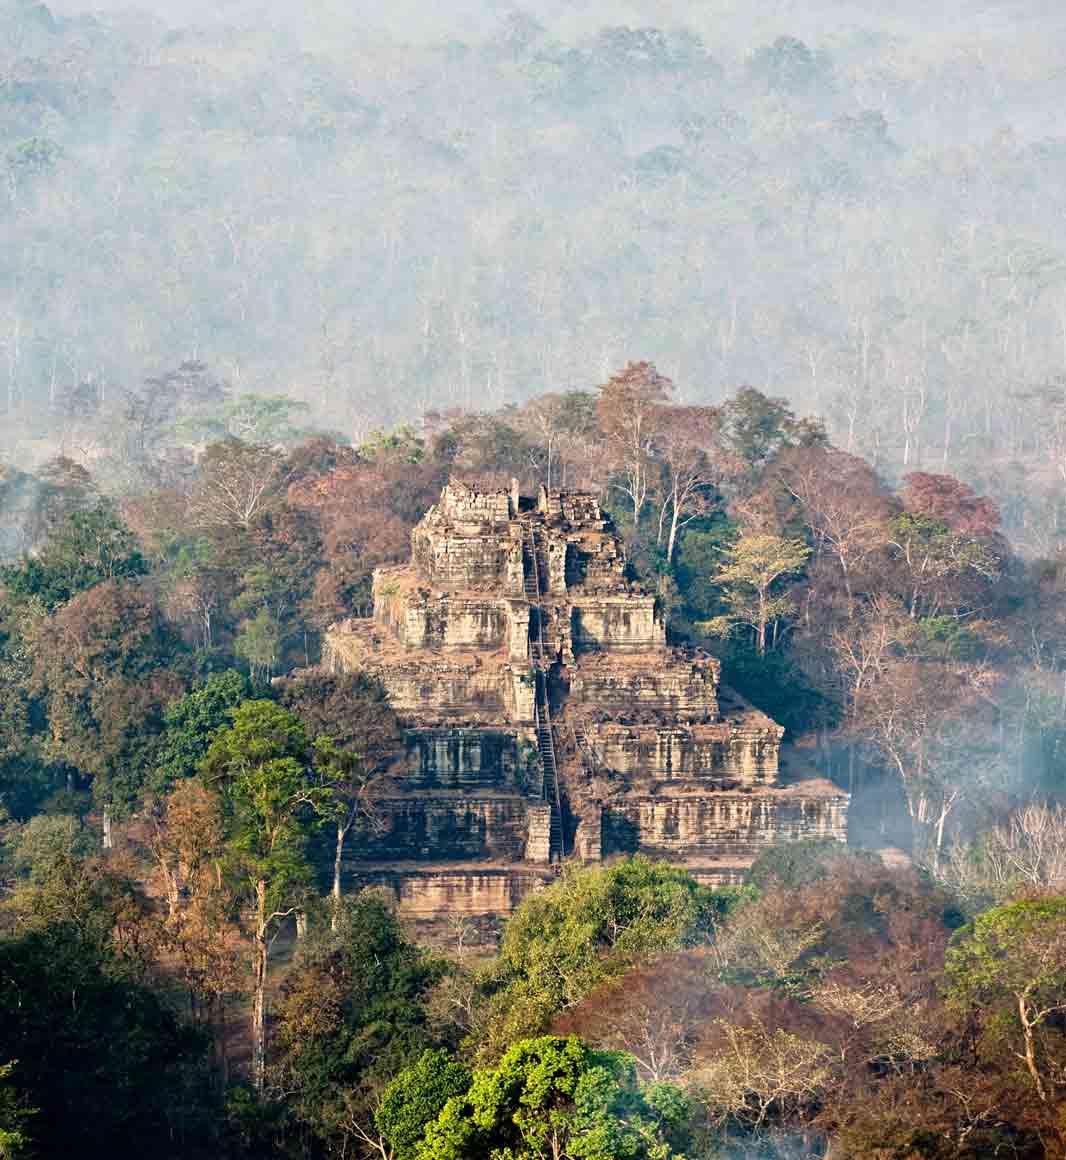 Aerial view of Koh Ker archaeological site in Cambodia